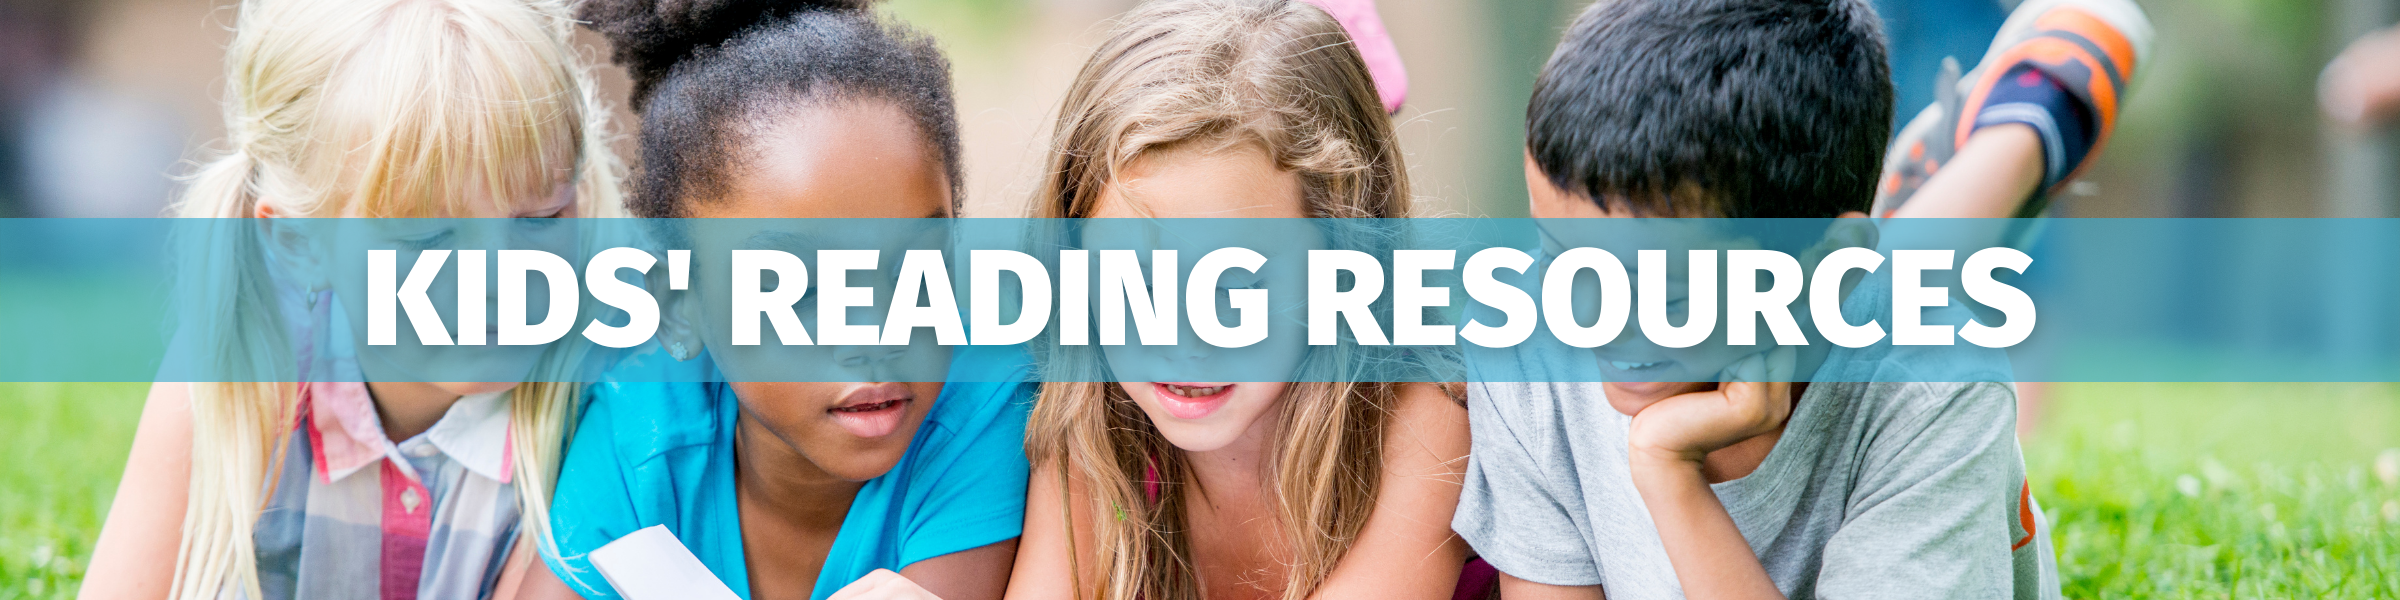 KIDS READING RESOURCES